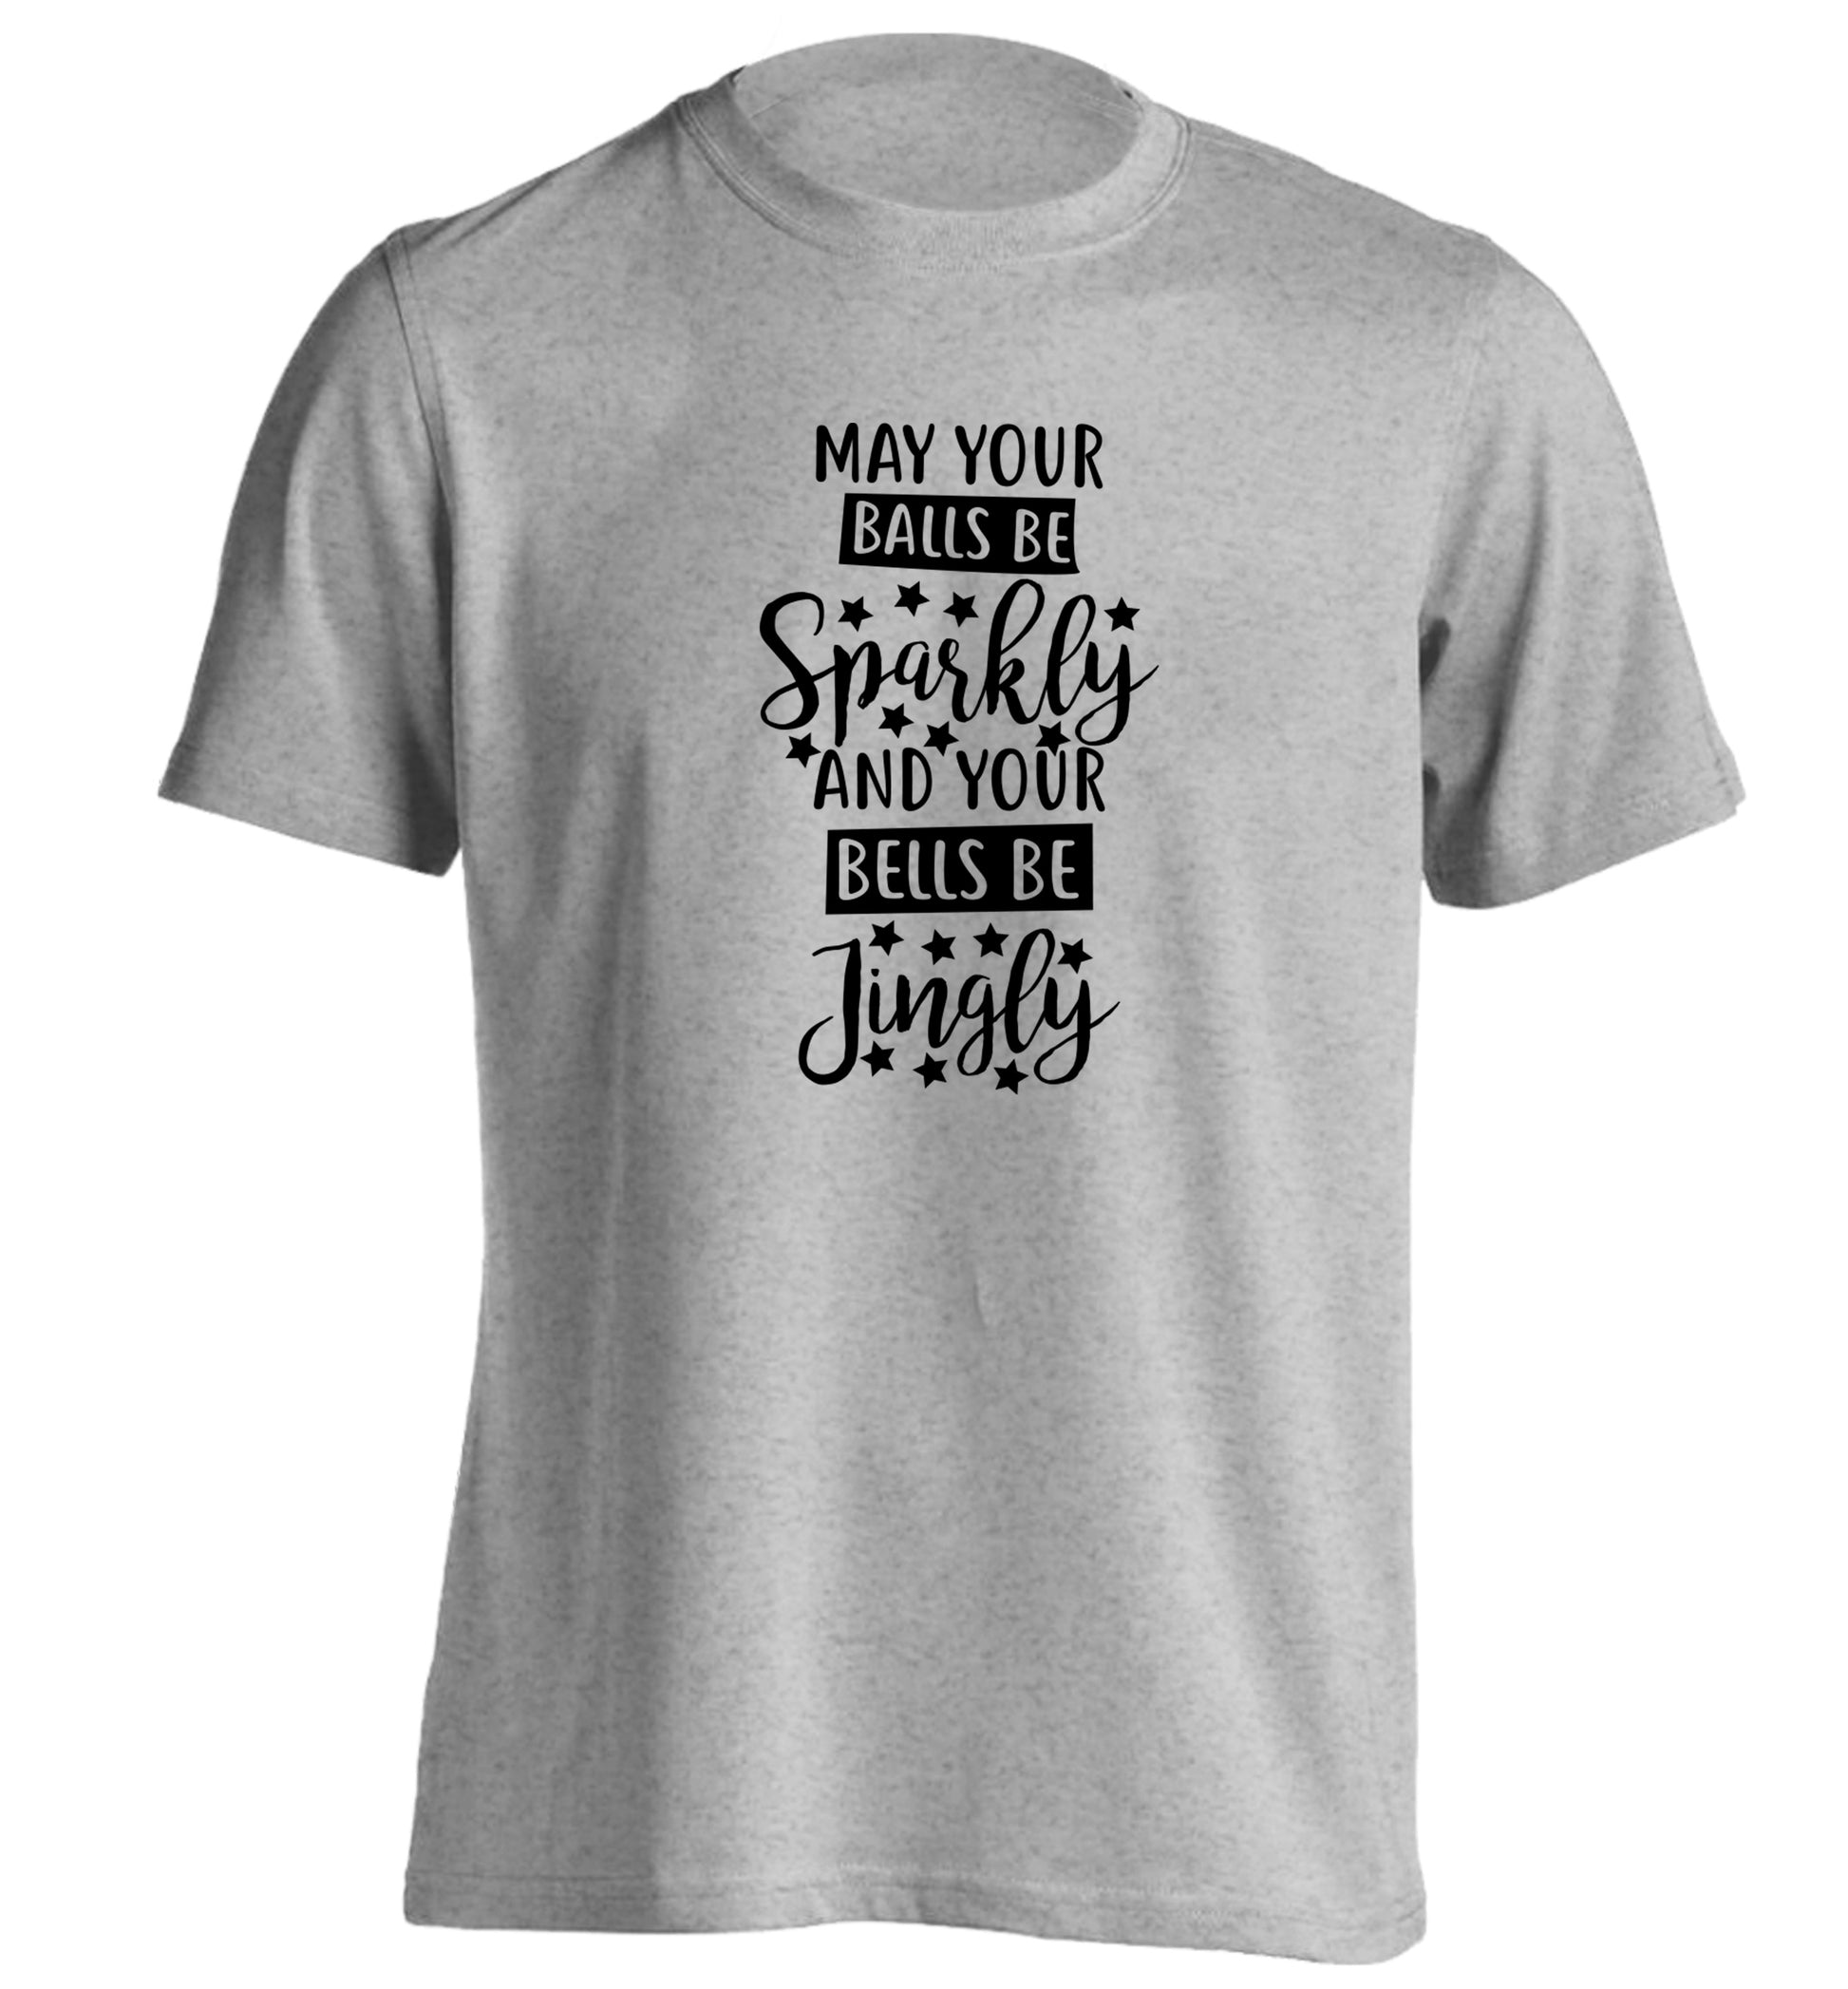 May your balls be sparkly and your bells be jingly adults unisex grey Tshirt 2XL